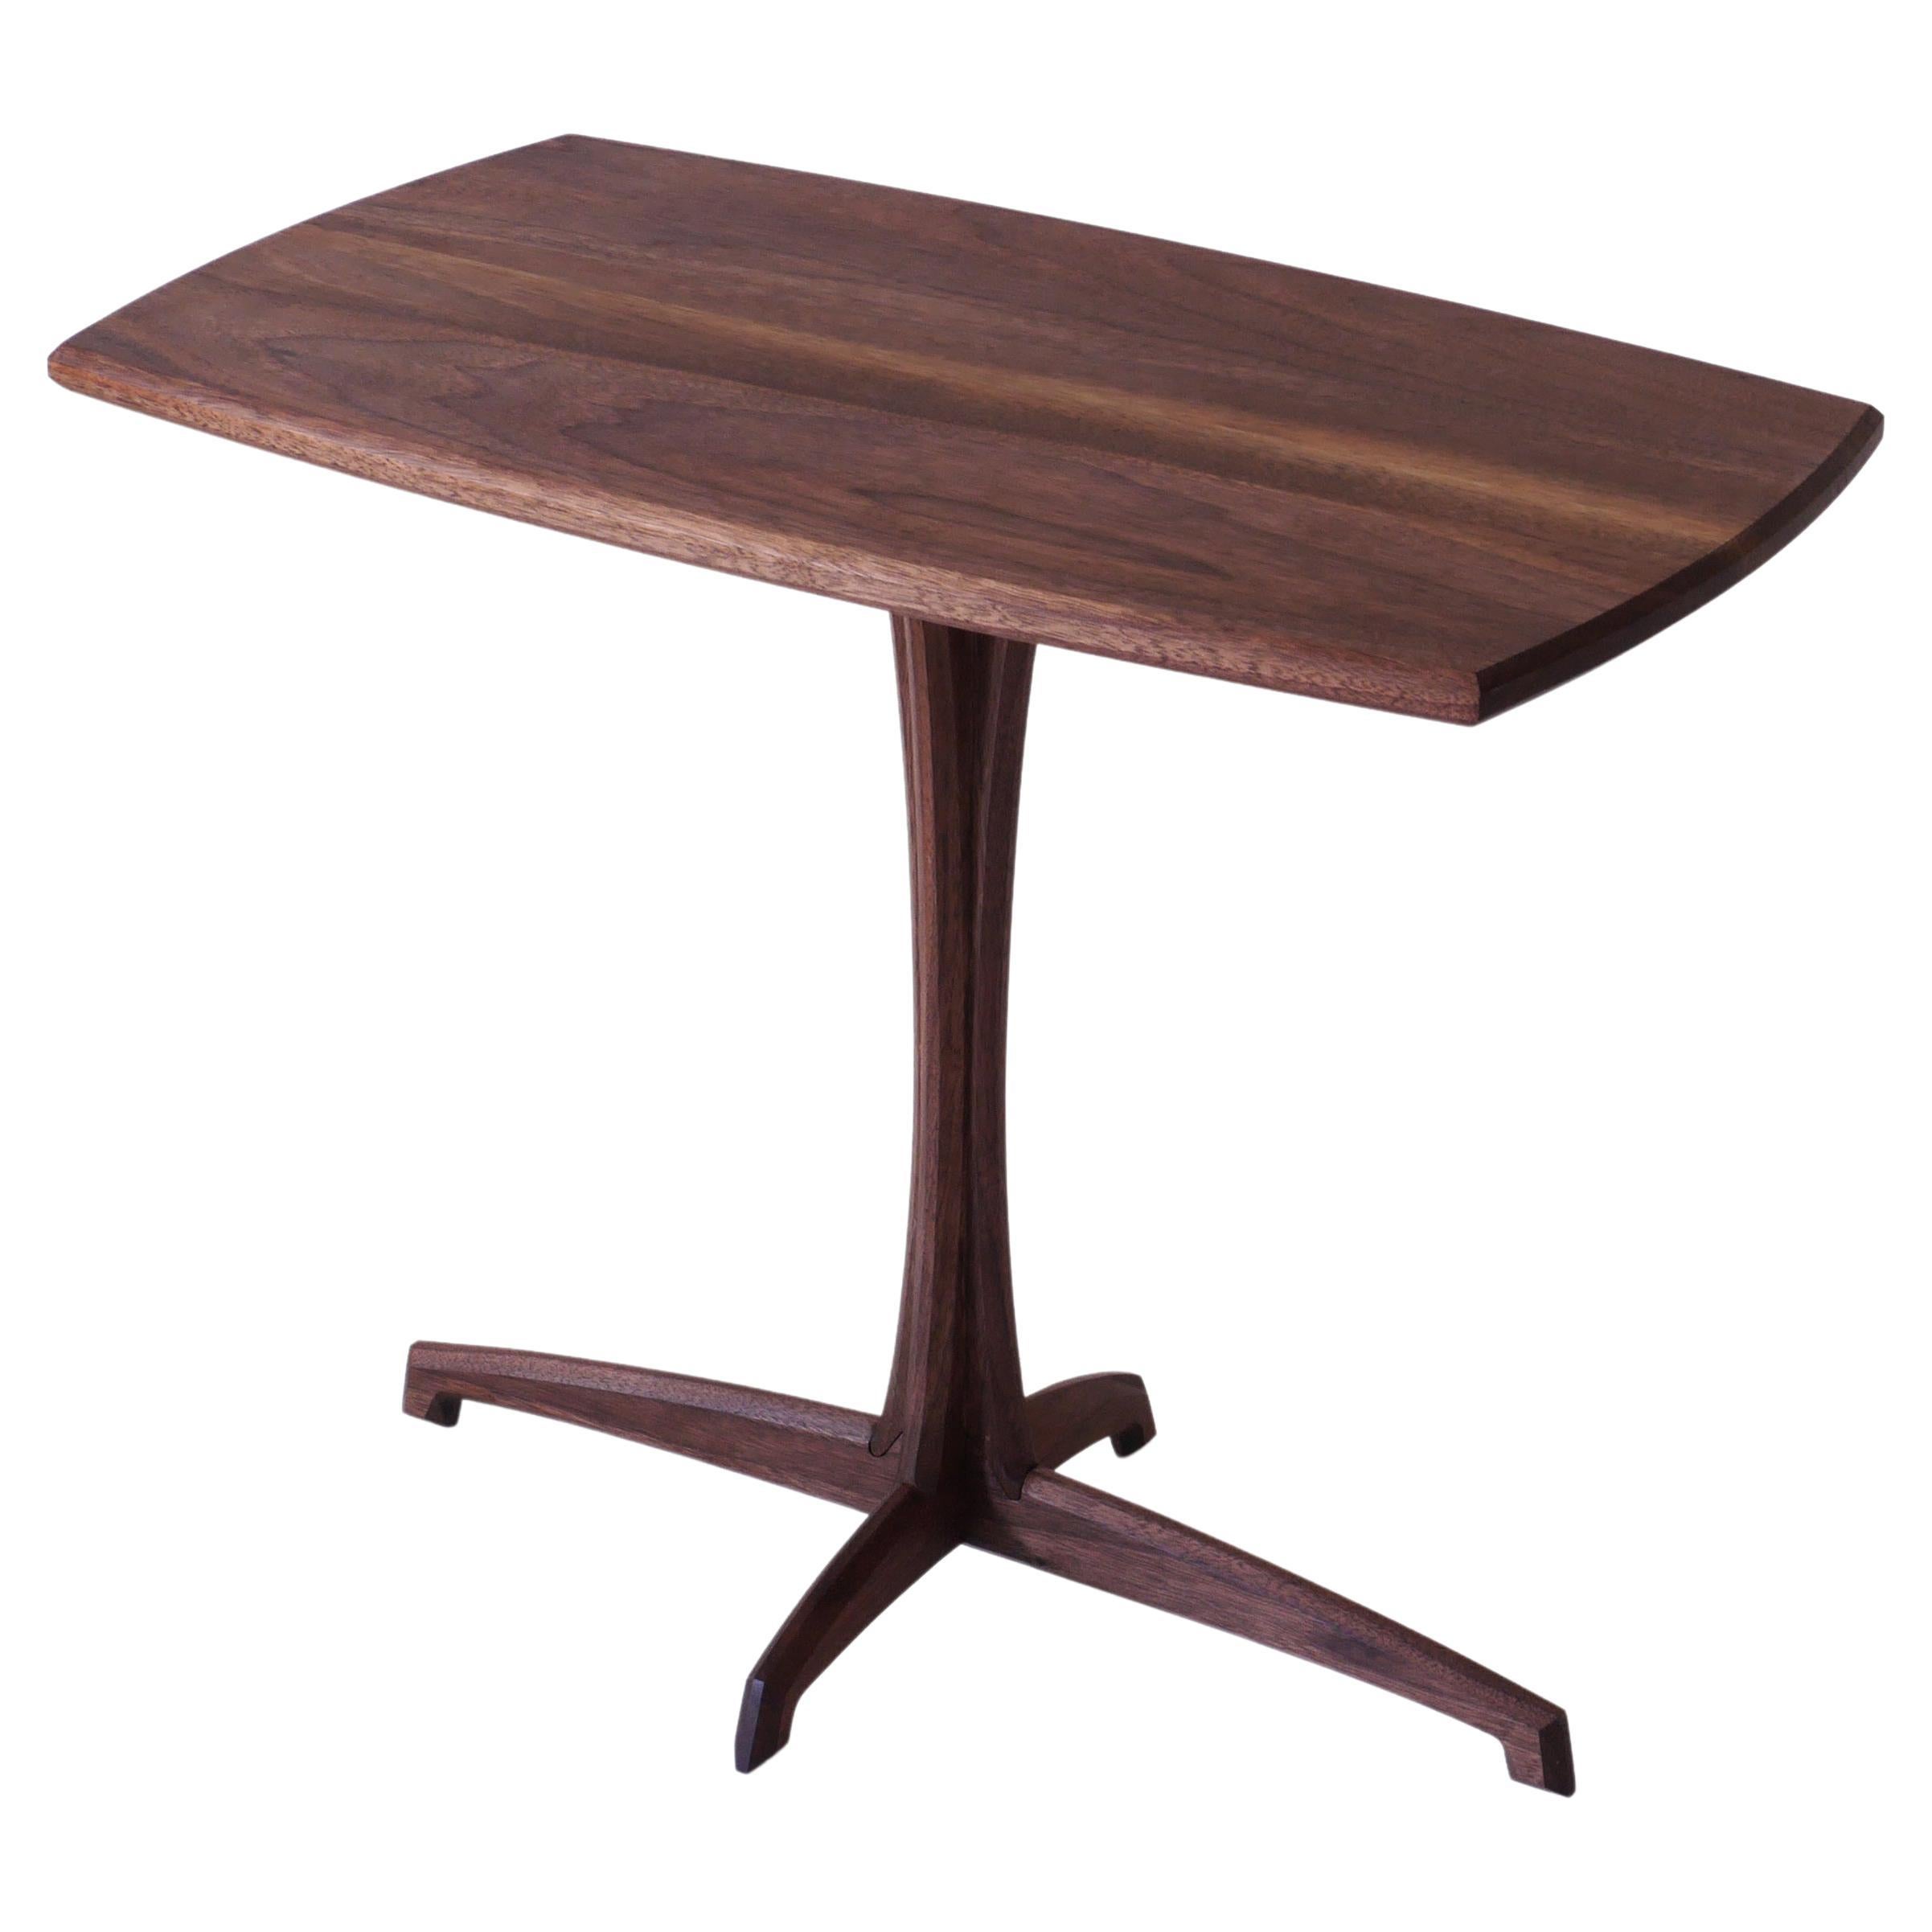 Walnut Plume Side Table, Contemporary Handmade Pedestal End Table by Arid